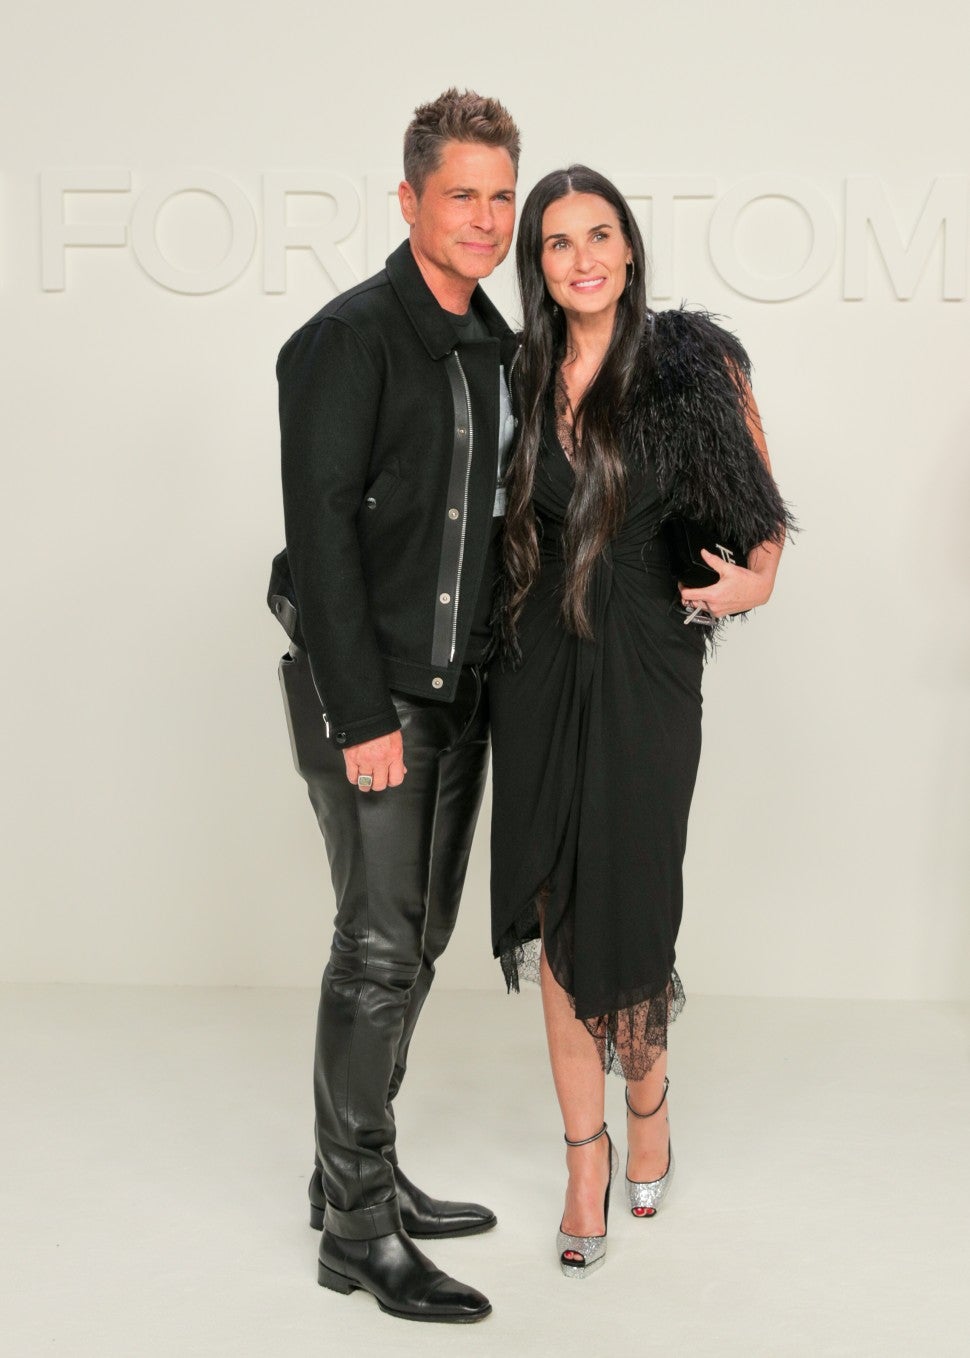 Rob Lowe and Demi Moore at Tom Ford F/W 2020 fashion show